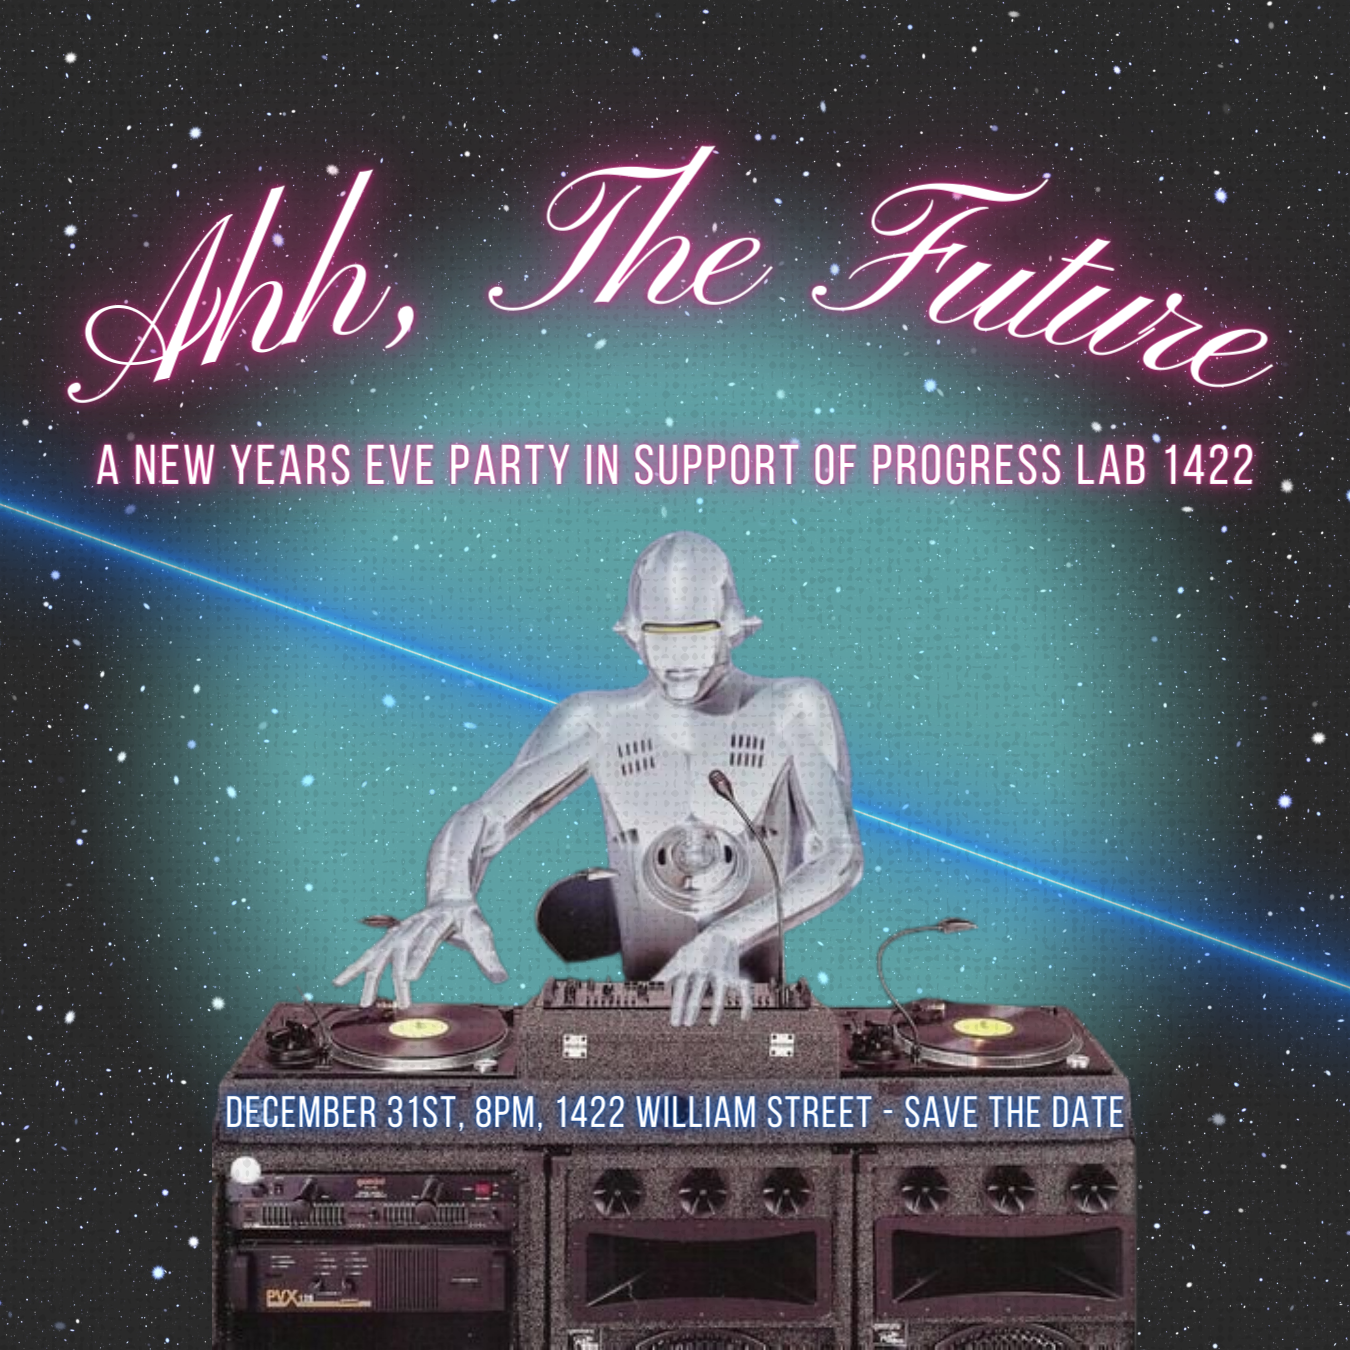 A poster for the new years eve party at PL1422.